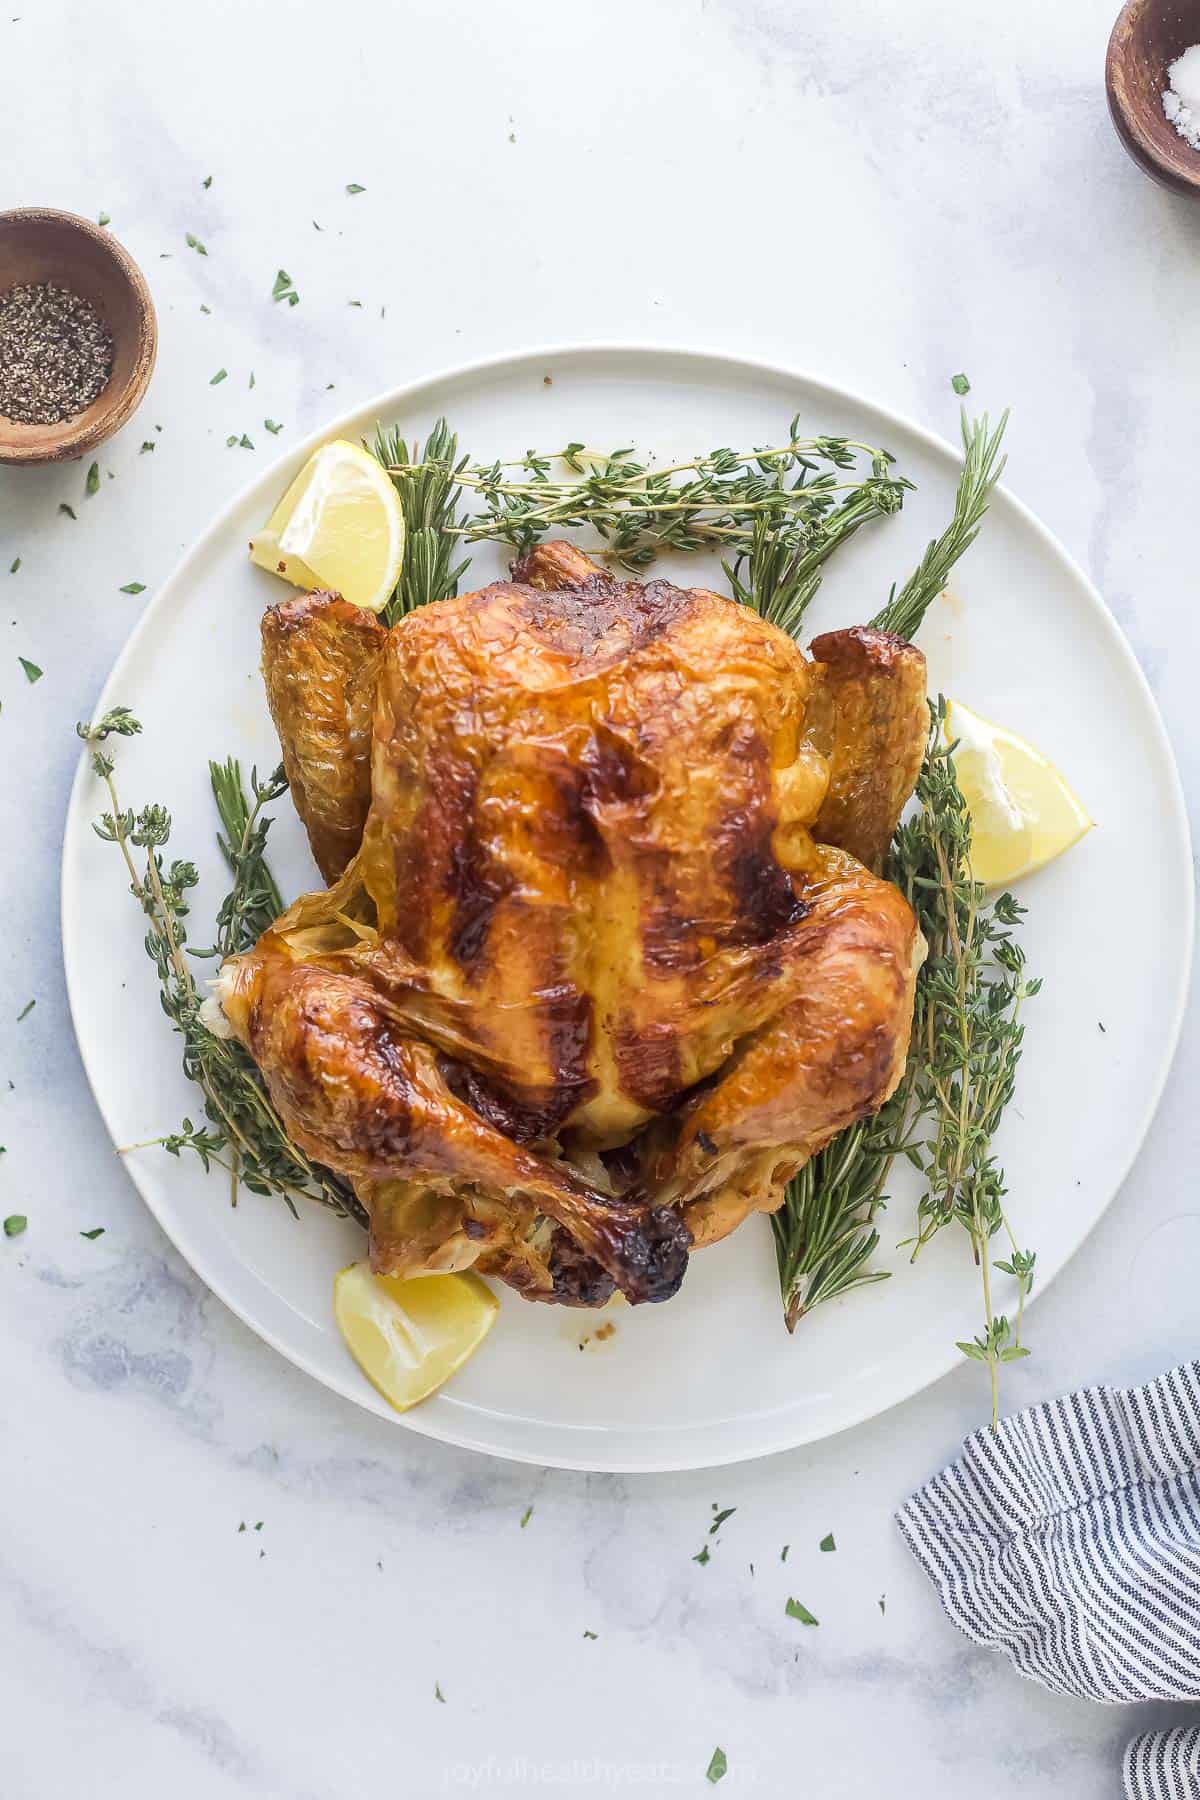 Instant Pot Whole Chicken with Rotisserie Seasoning